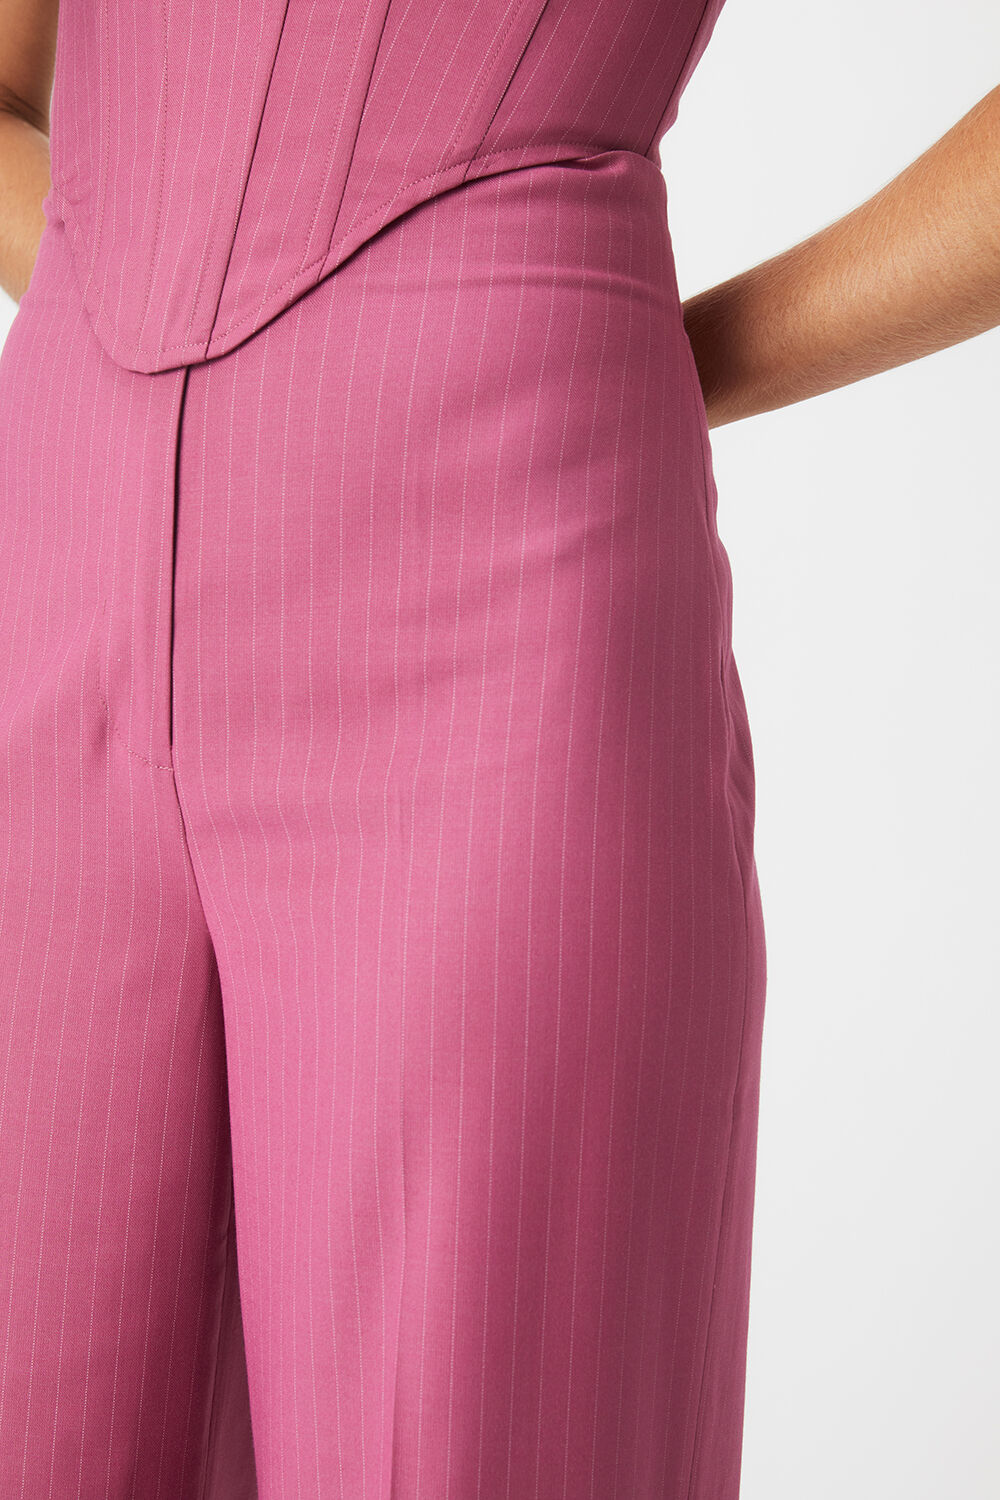 HIGH WAIST PIN STRIPE PANT in colour WILD ORCHID